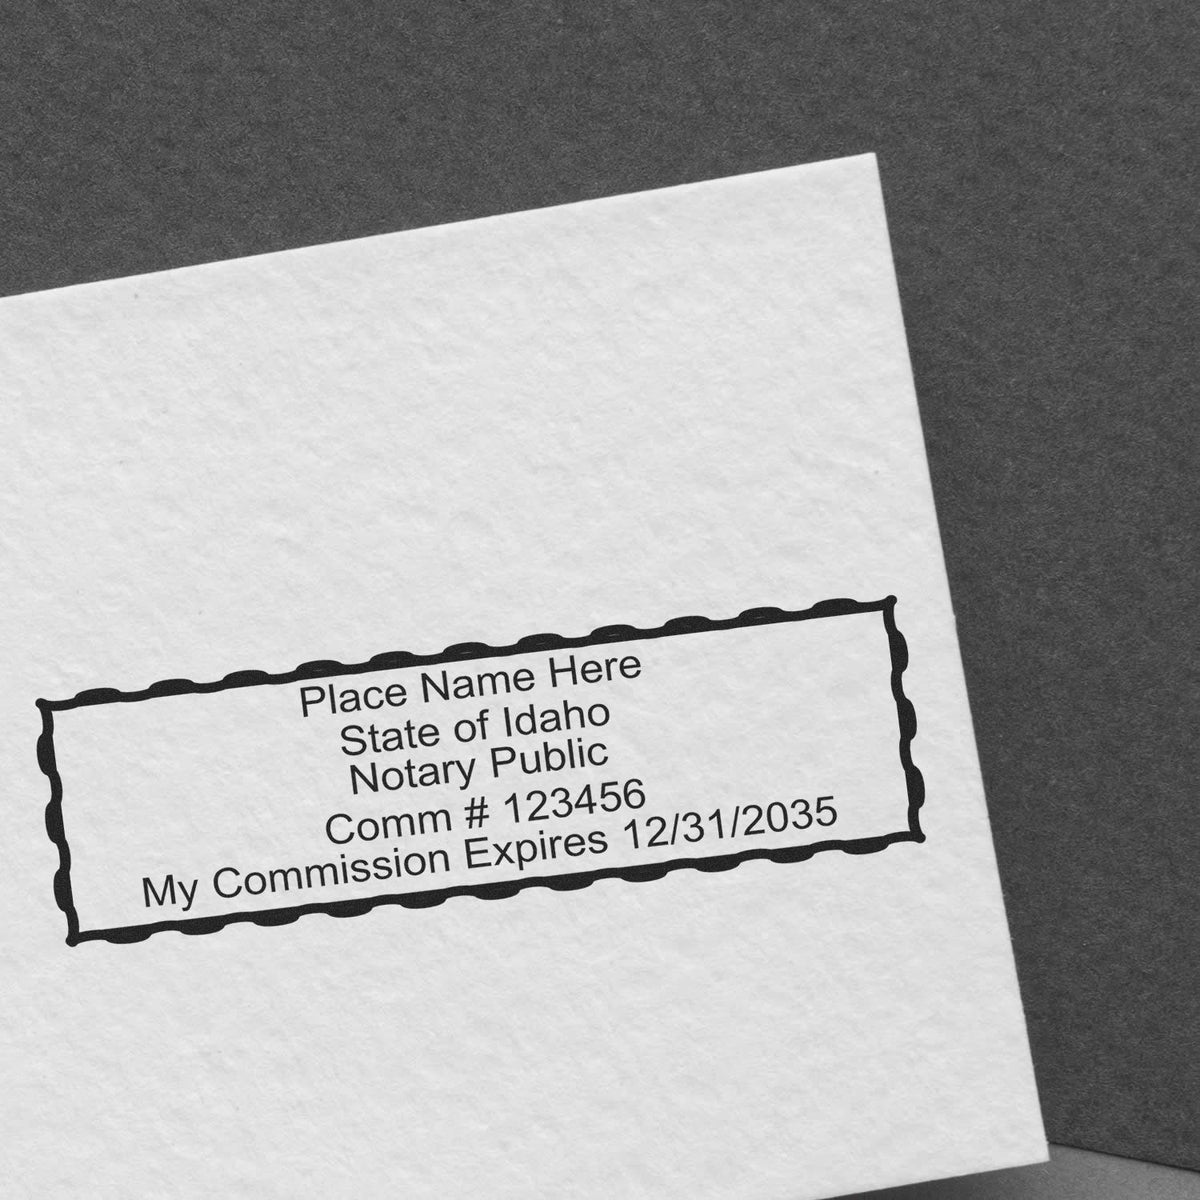 The Super Slim Idaho Notary Public Stamp stamp impression comes to life with a crisp, detailed photo on paper - showcasing true professional quality.